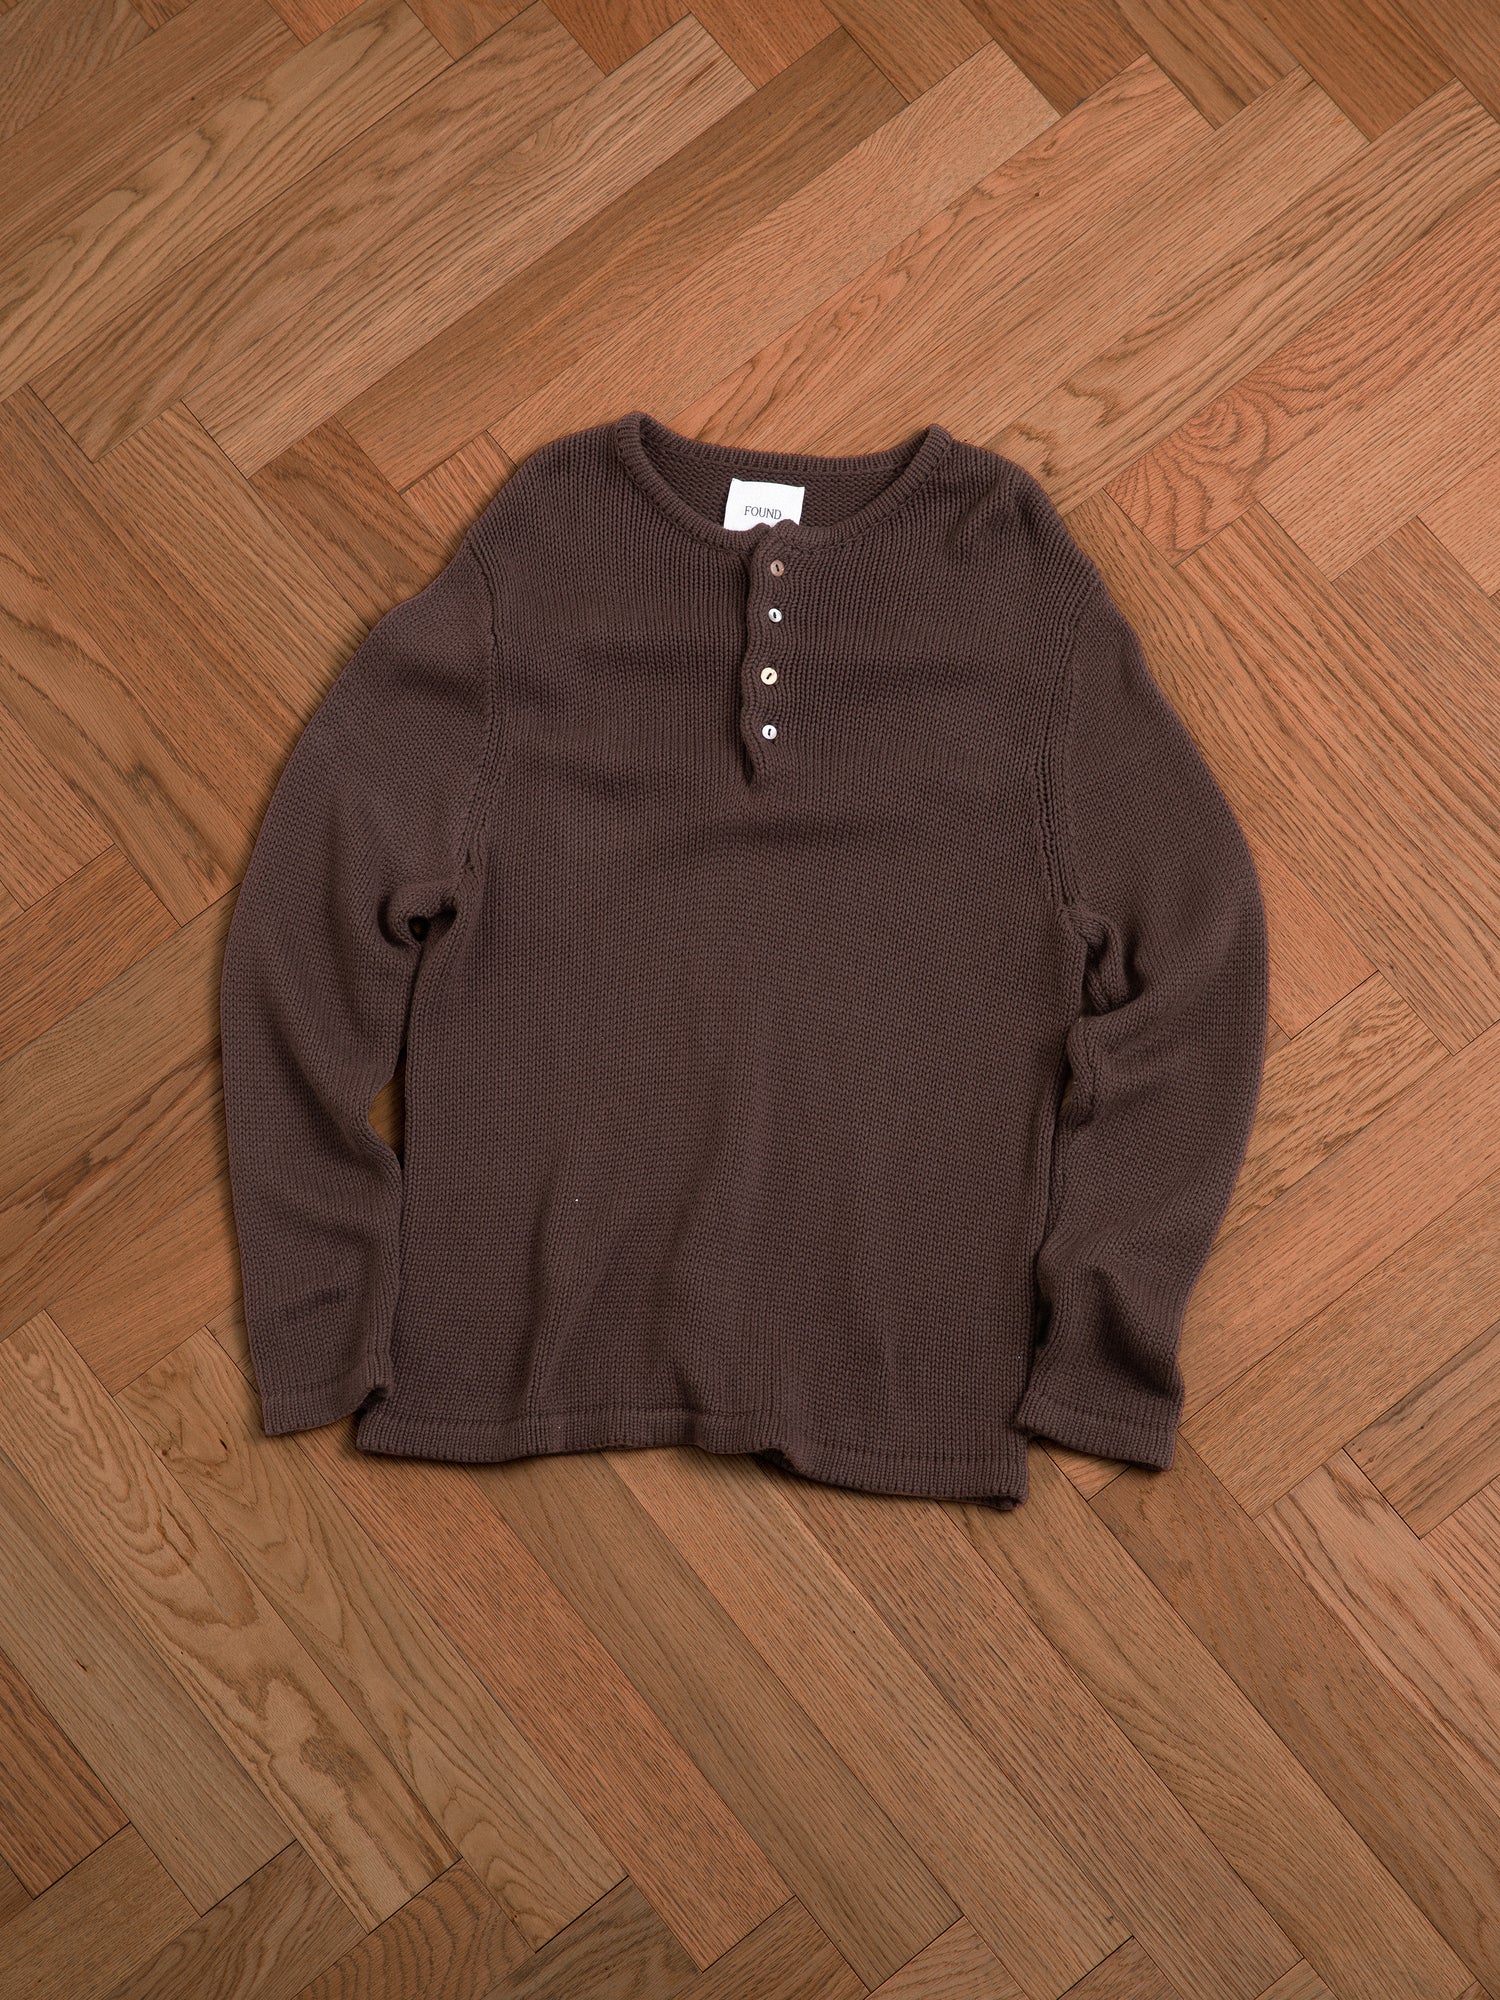 A brown Knit Henley sweater from Profound laying on a wooden floor.